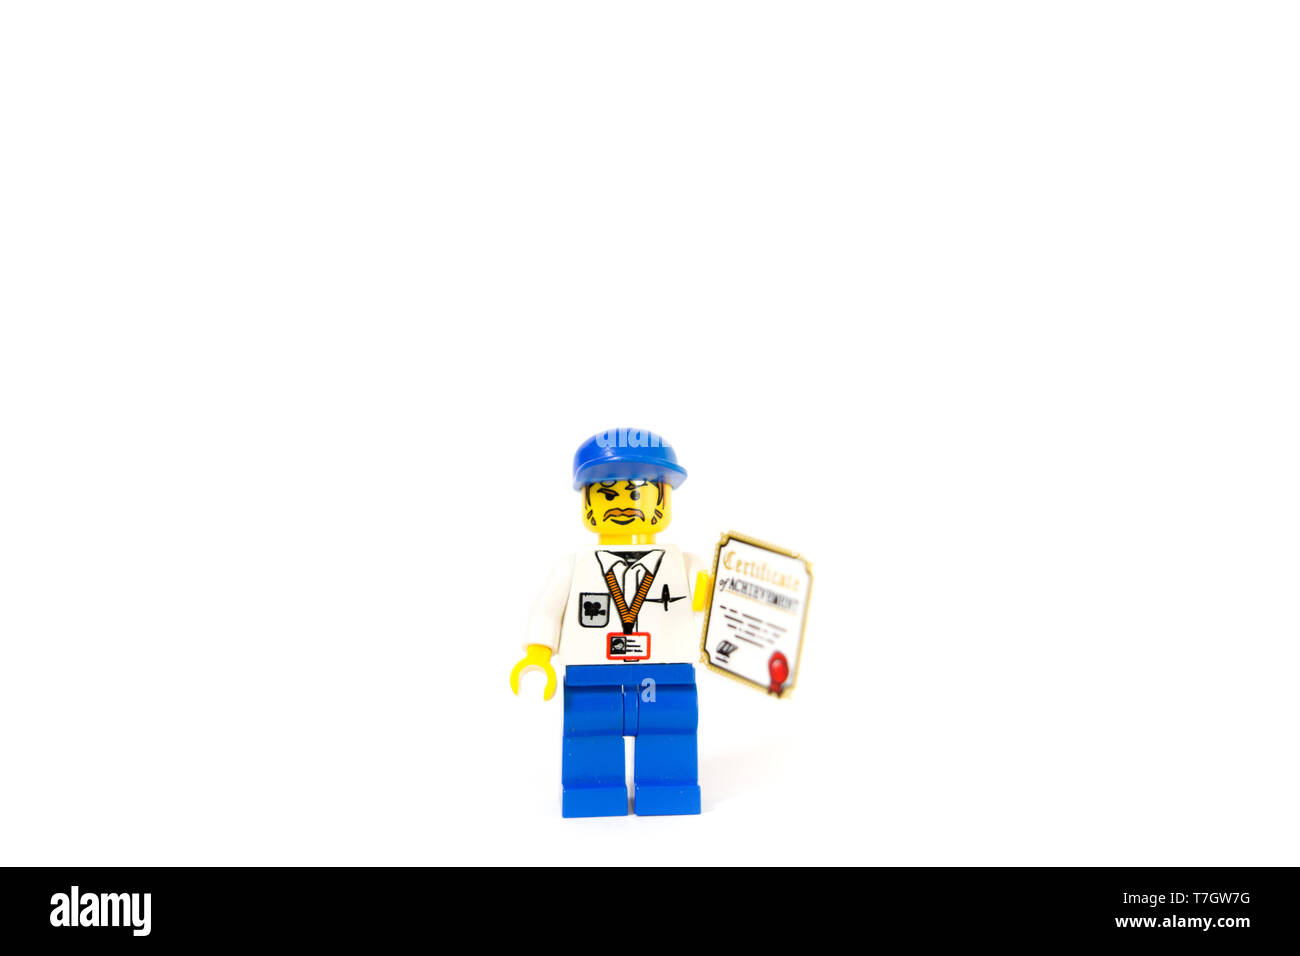 A Lego Film Maker Holding A Certificate Of Achievement This Cameraman Progressing His Career Stock Photo Alamy